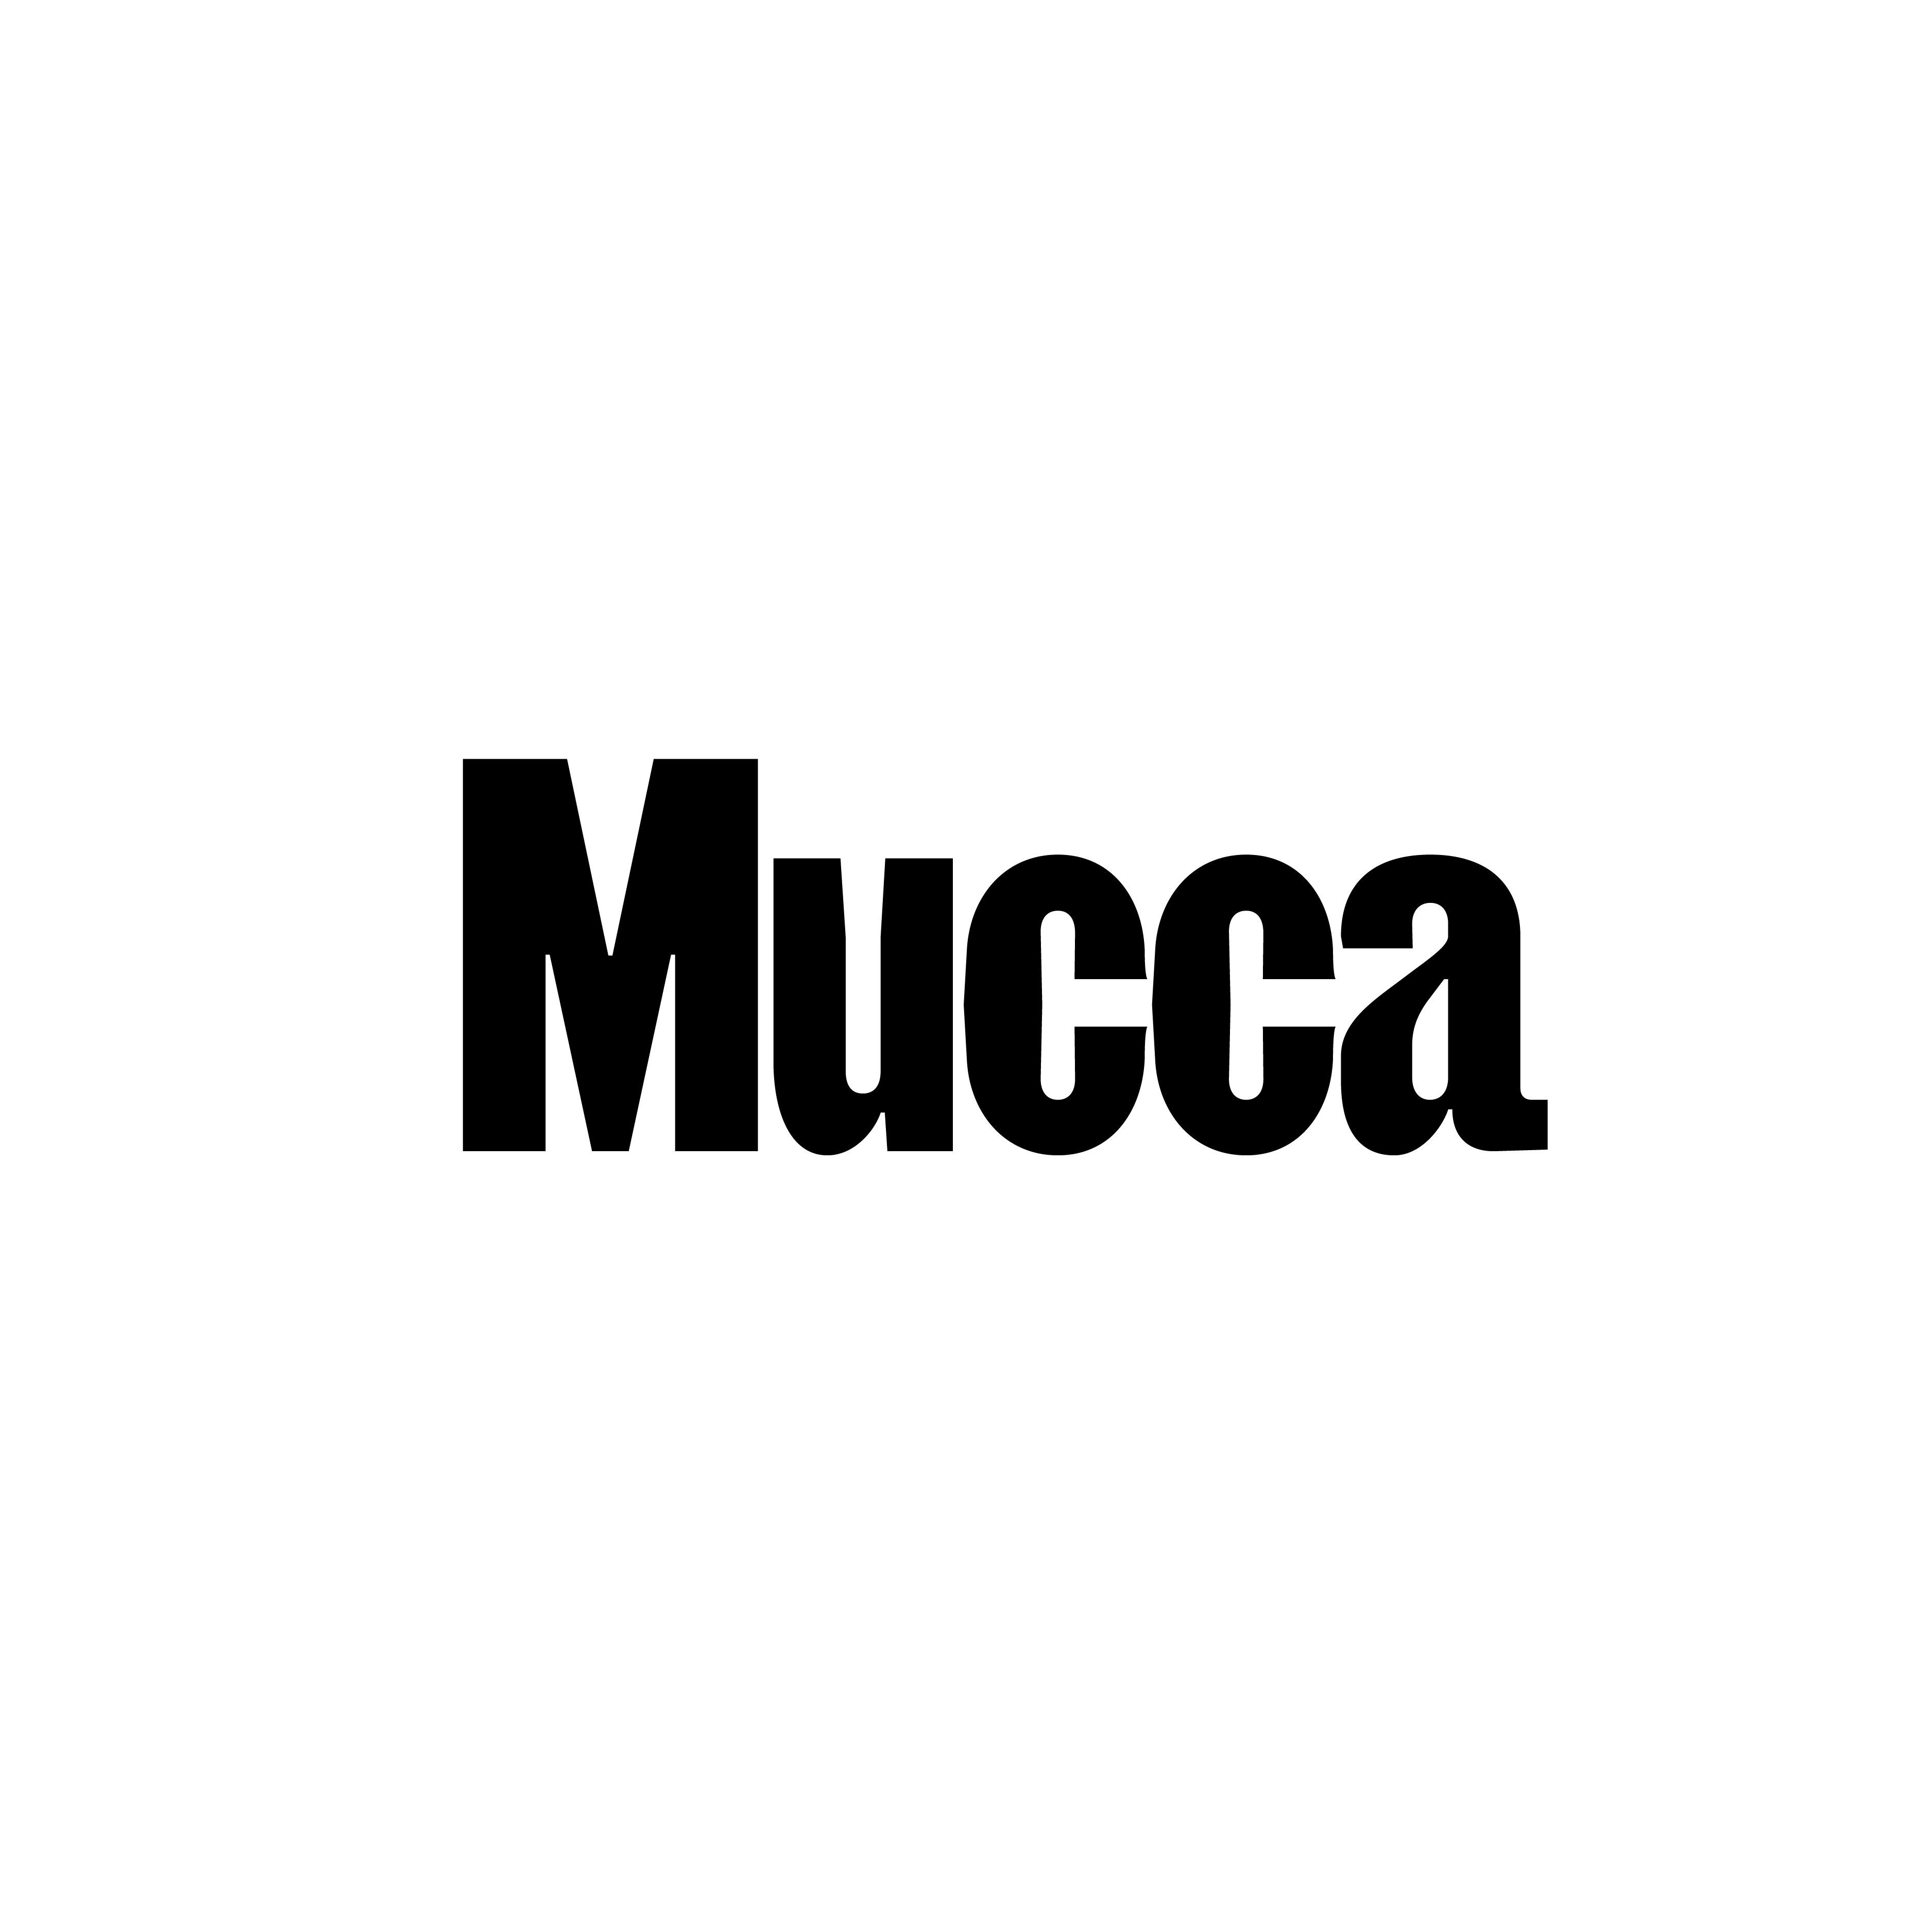 Mucca logo design by logo designer Instinctual Beings for your inspiration and for the worlds largest logo competition